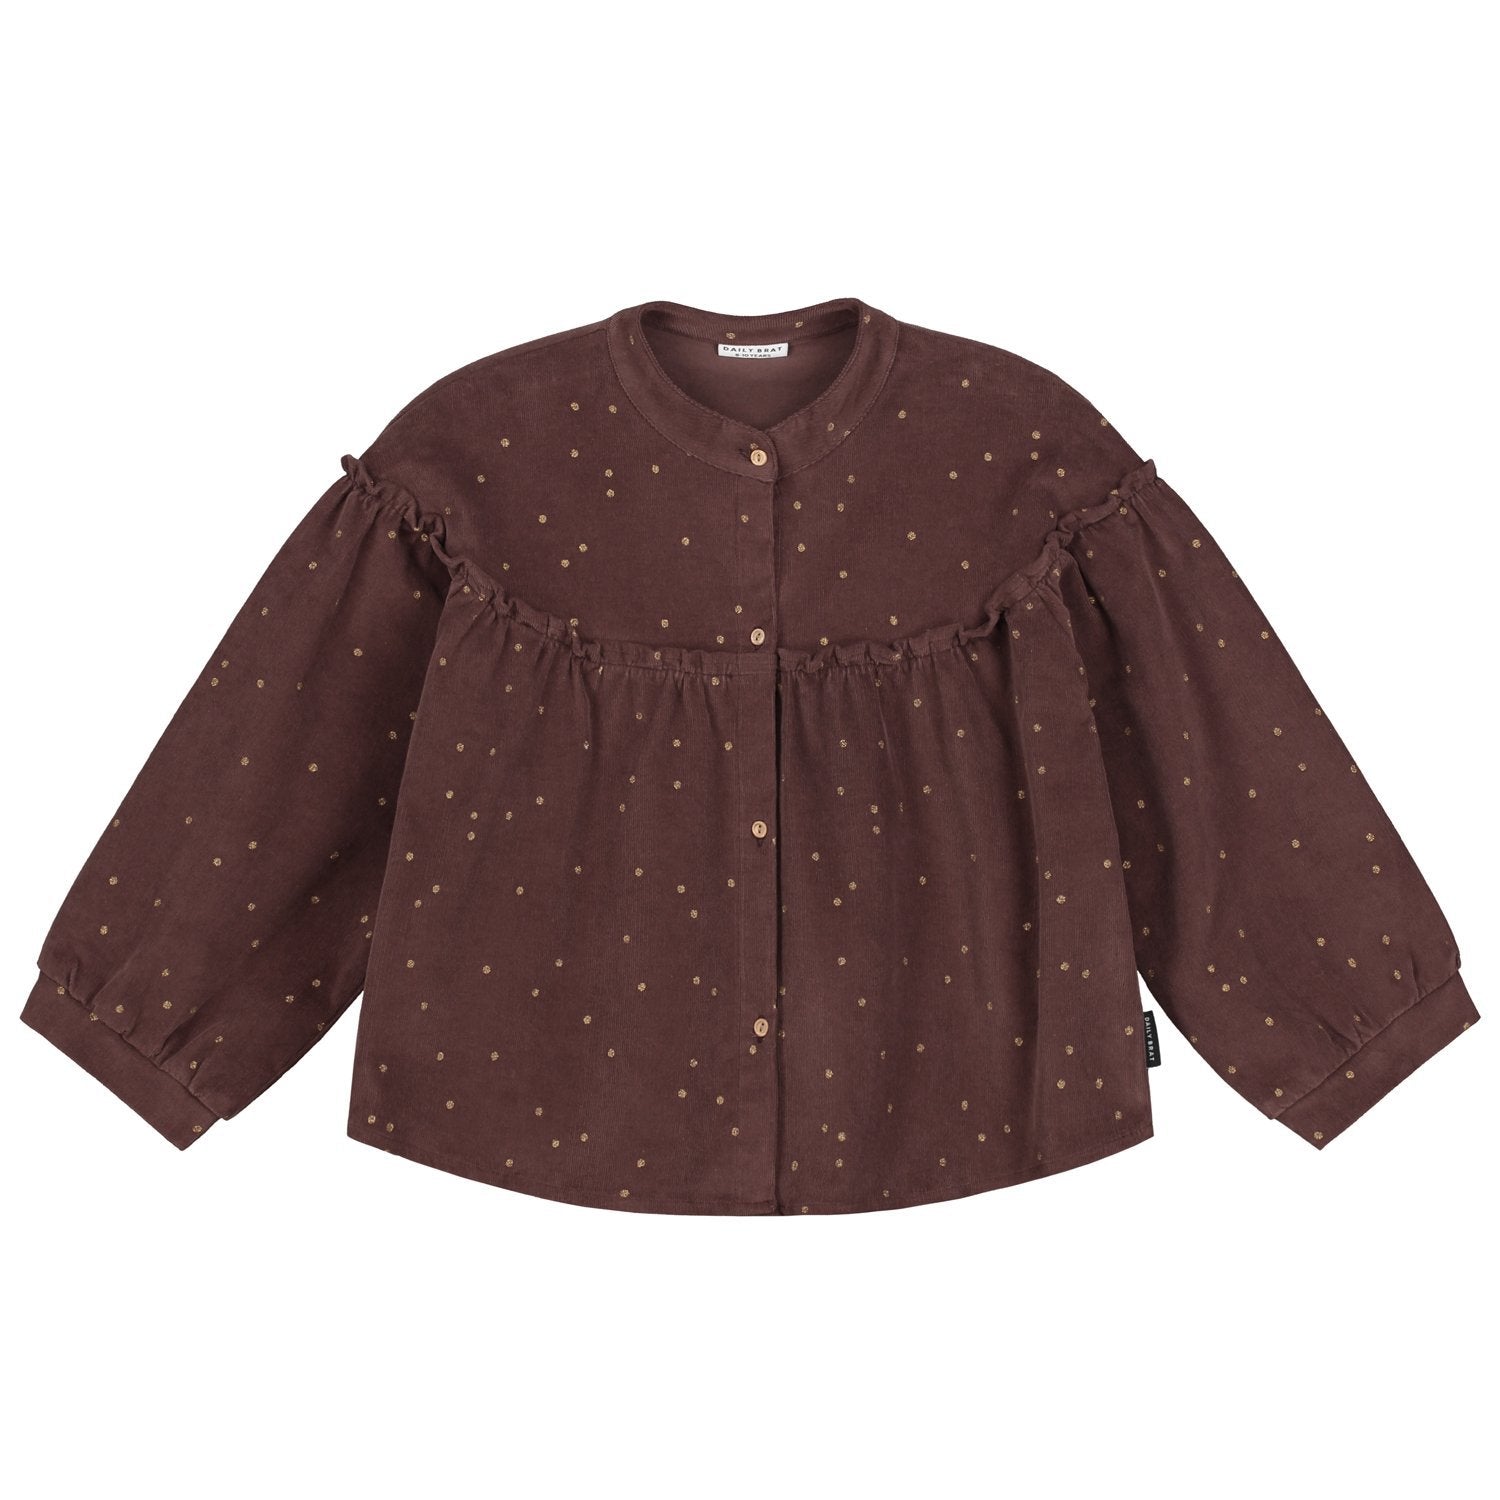 Tara Corduroy Bluse Glitter Dots find Stylish Fashion for Little People- at Little Foxx Concept Store